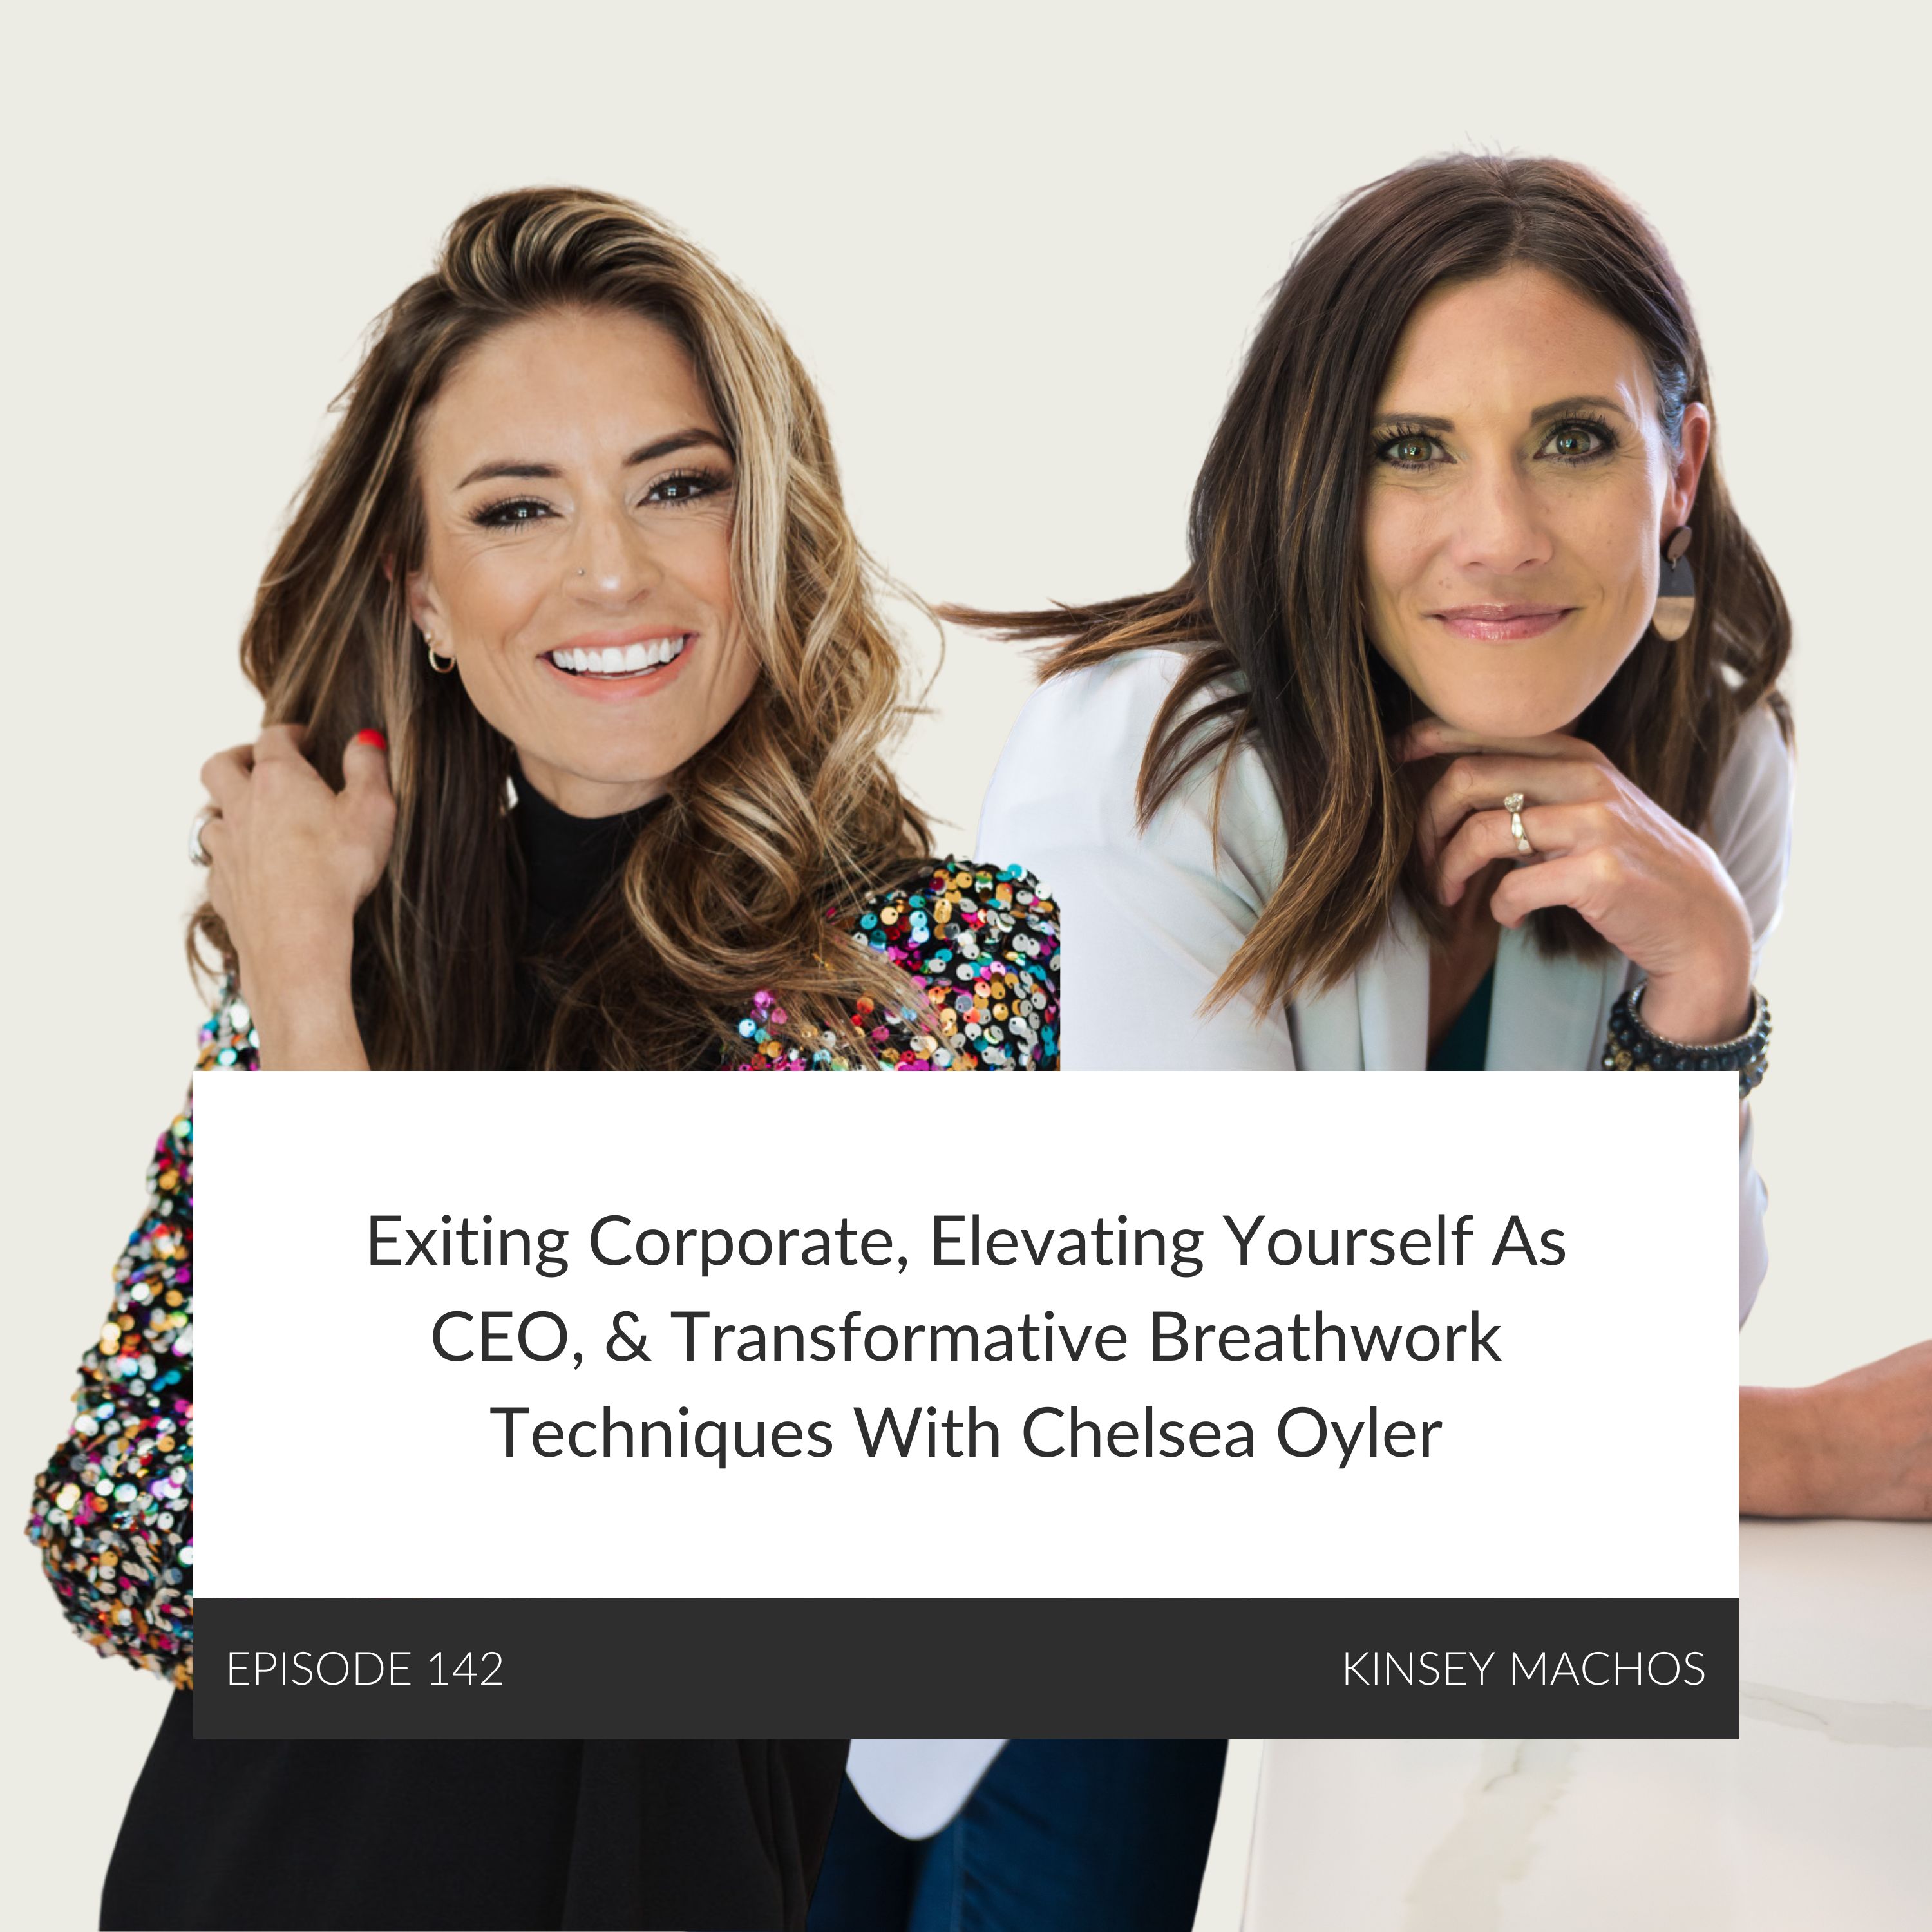 Exiting Corporate, Elevating Yourself As CEO, & Transformative Breathwork Techniques With Chelsea Oyler